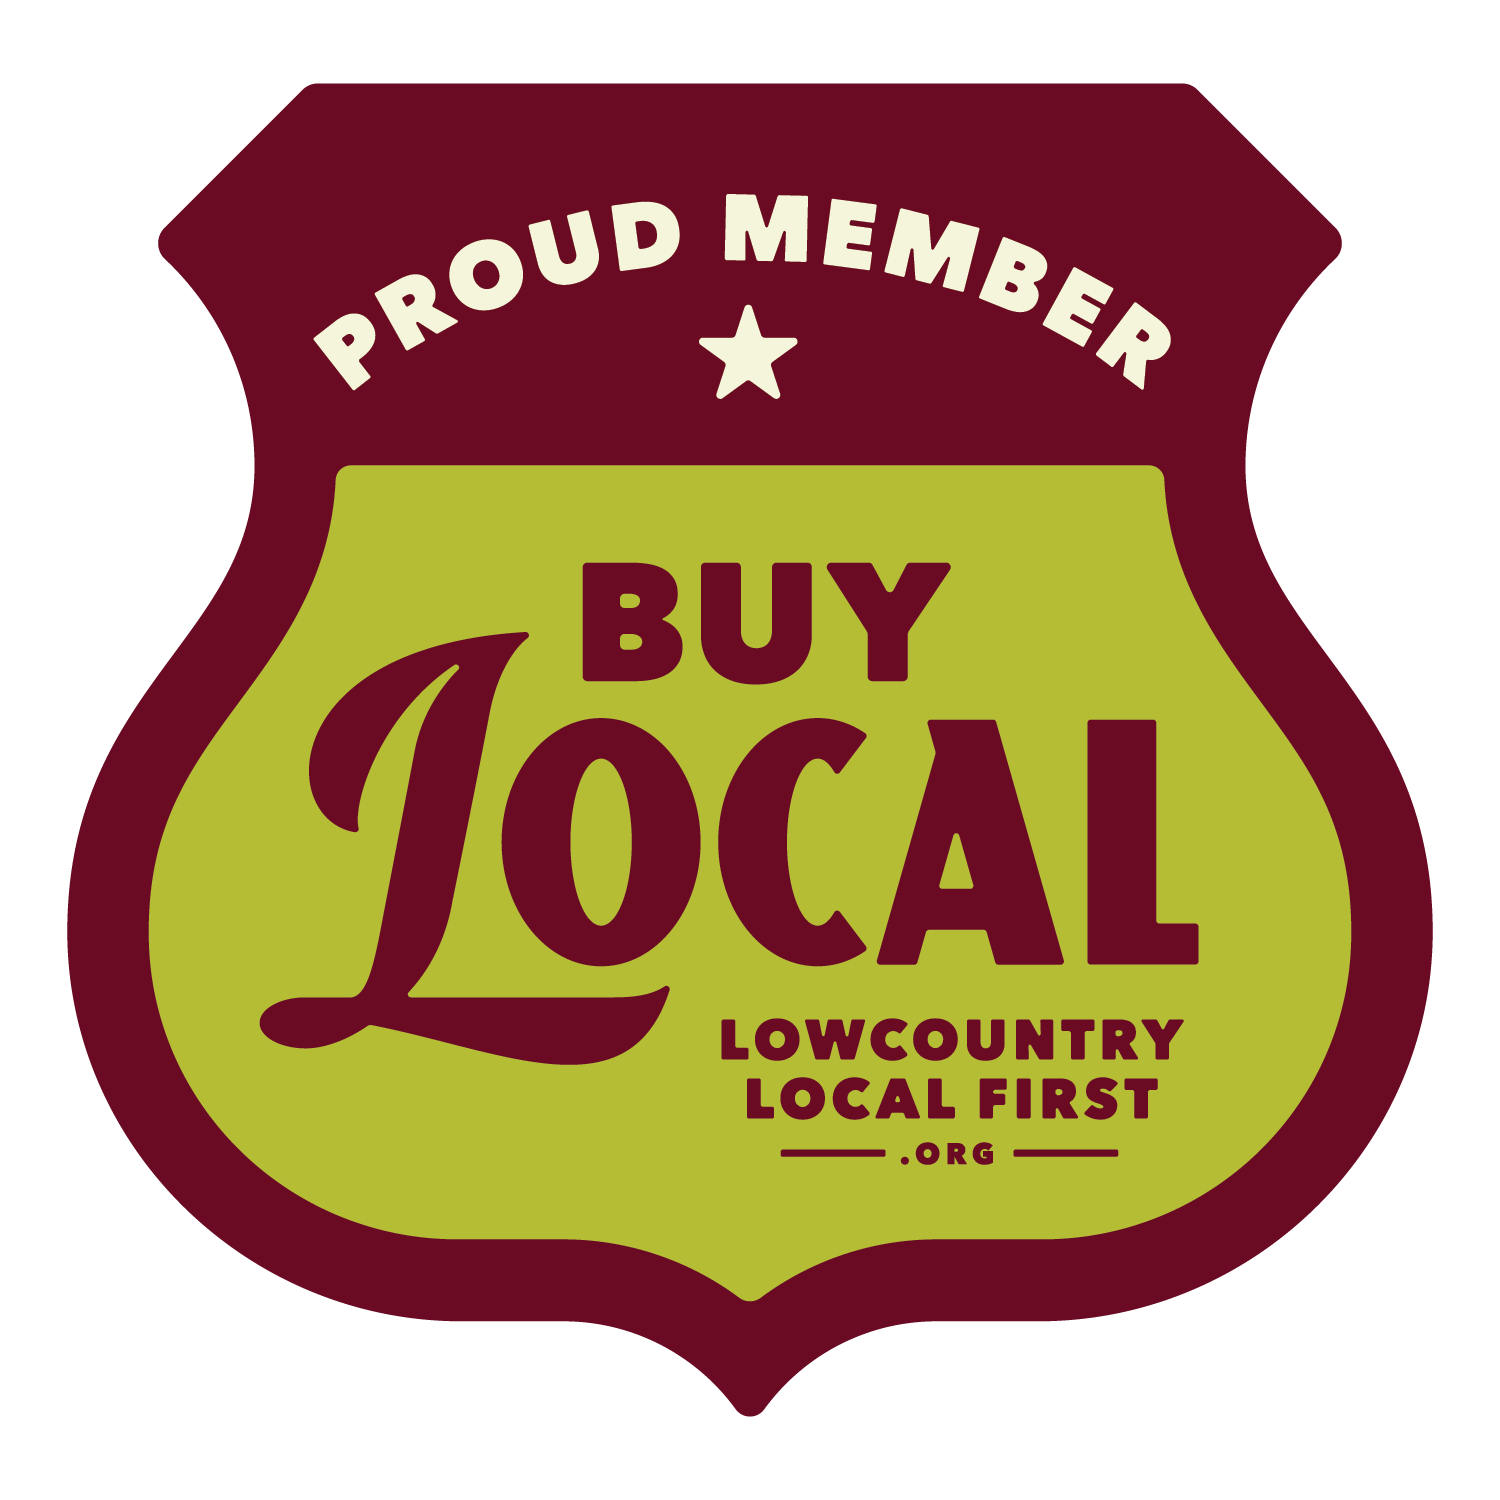 Lowcountry Local First